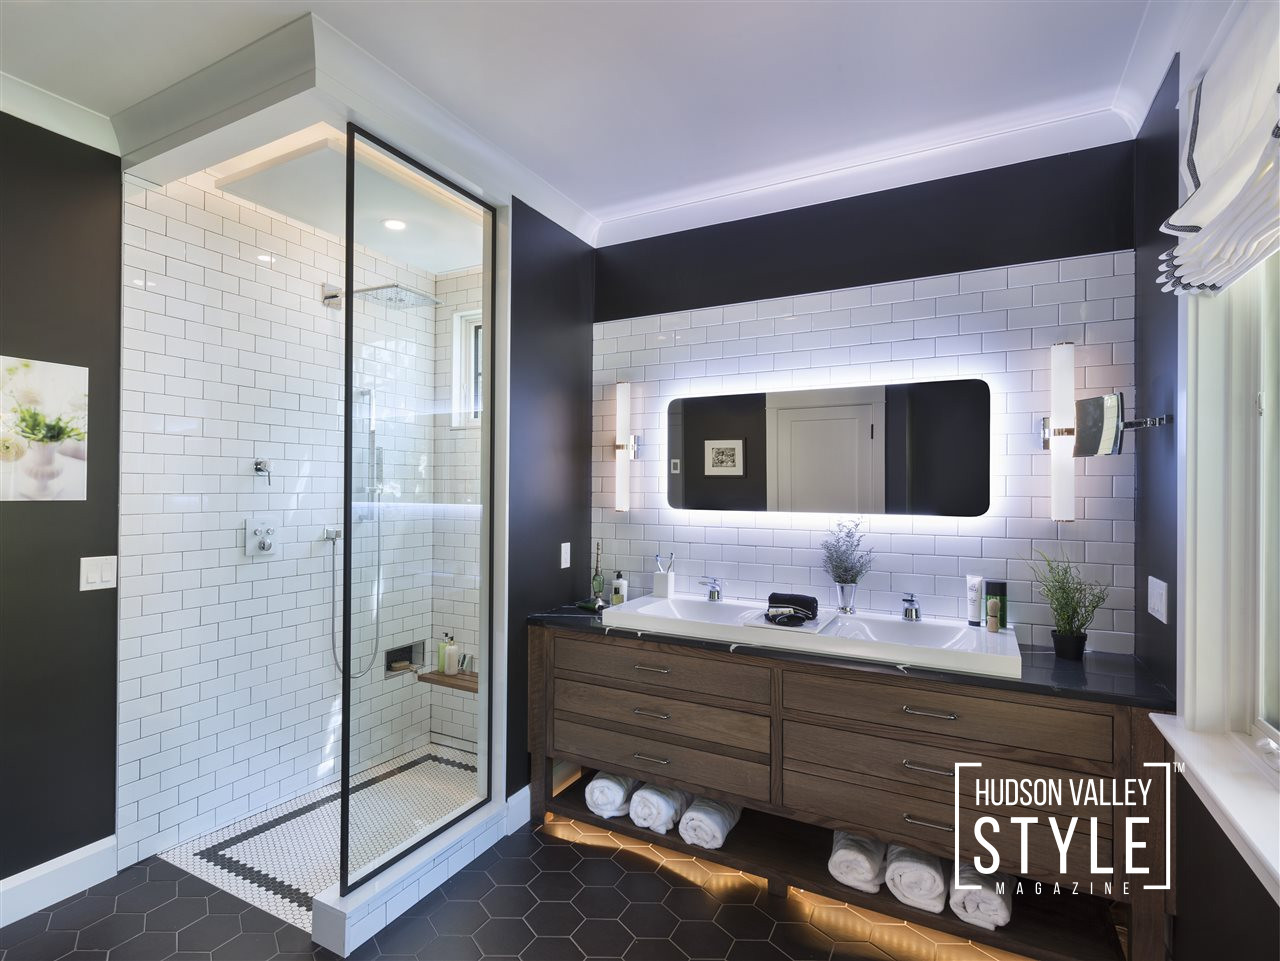 Universal design walk-in showers bring comfort and safety to the entire family